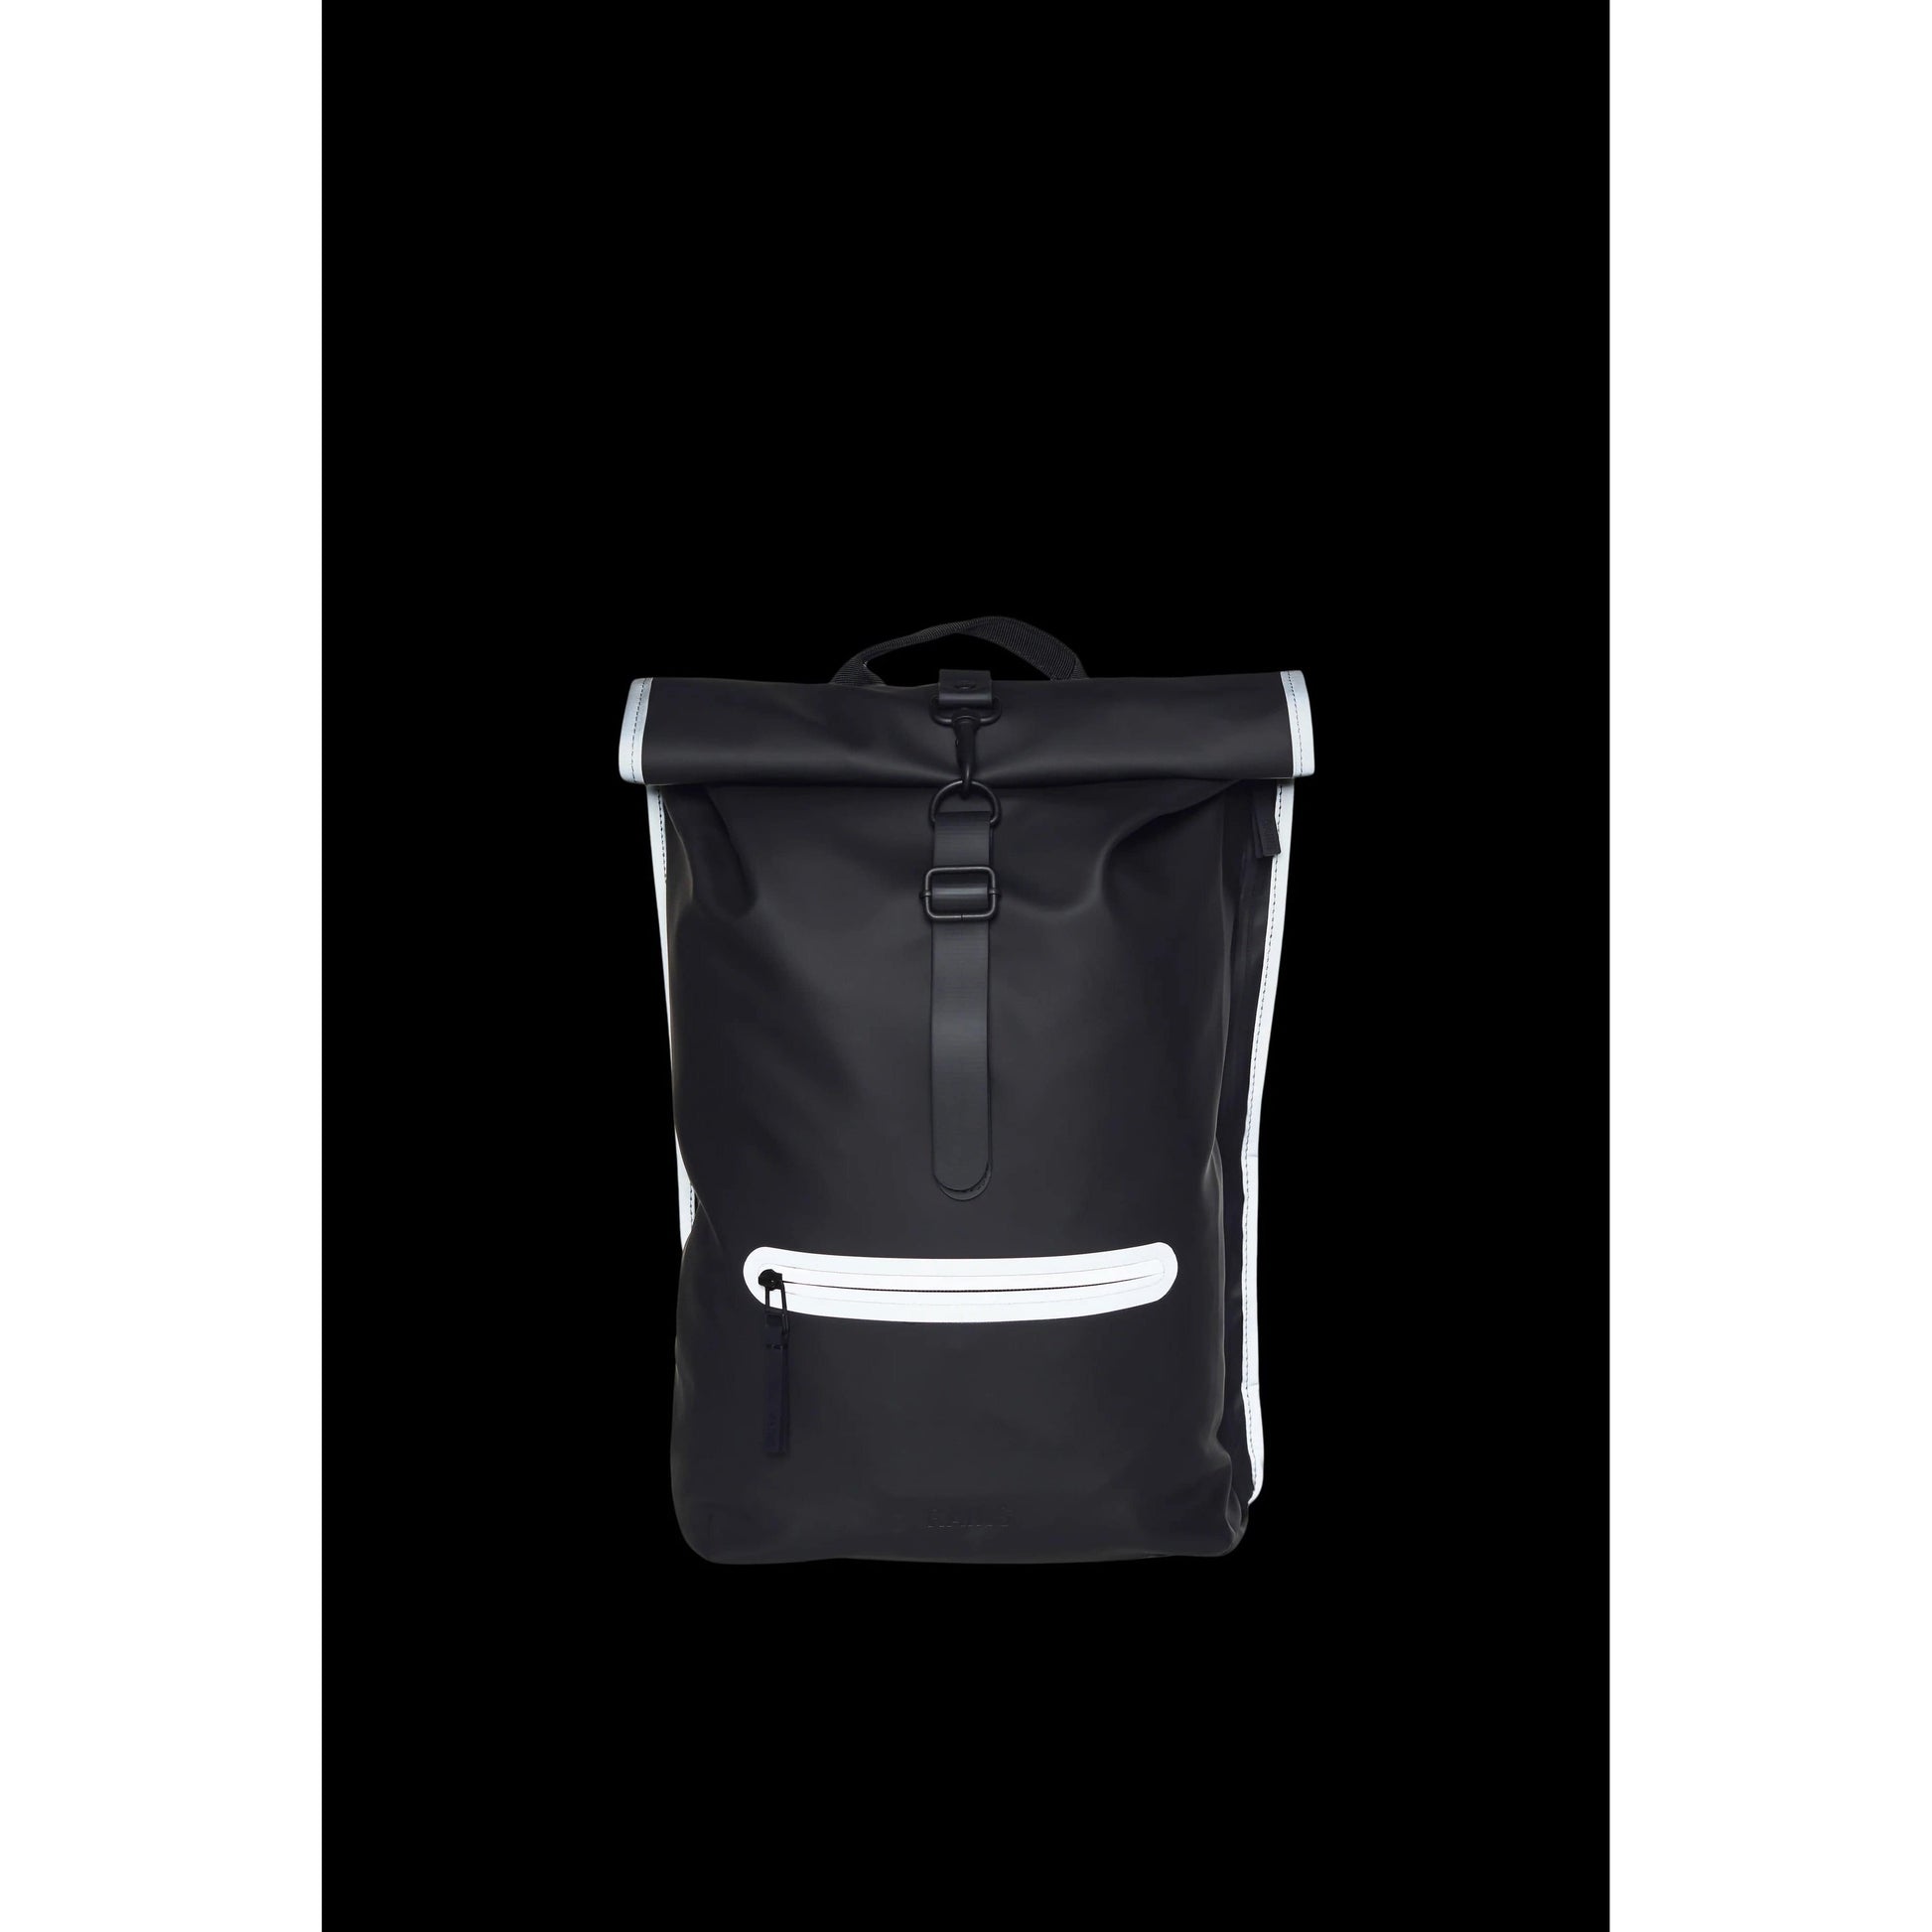 RAINS Backpacks H18.8 x W12.6 x D4.3 in / Black Reflective / Polyester RAINS Rolltop Rucksack Reflective